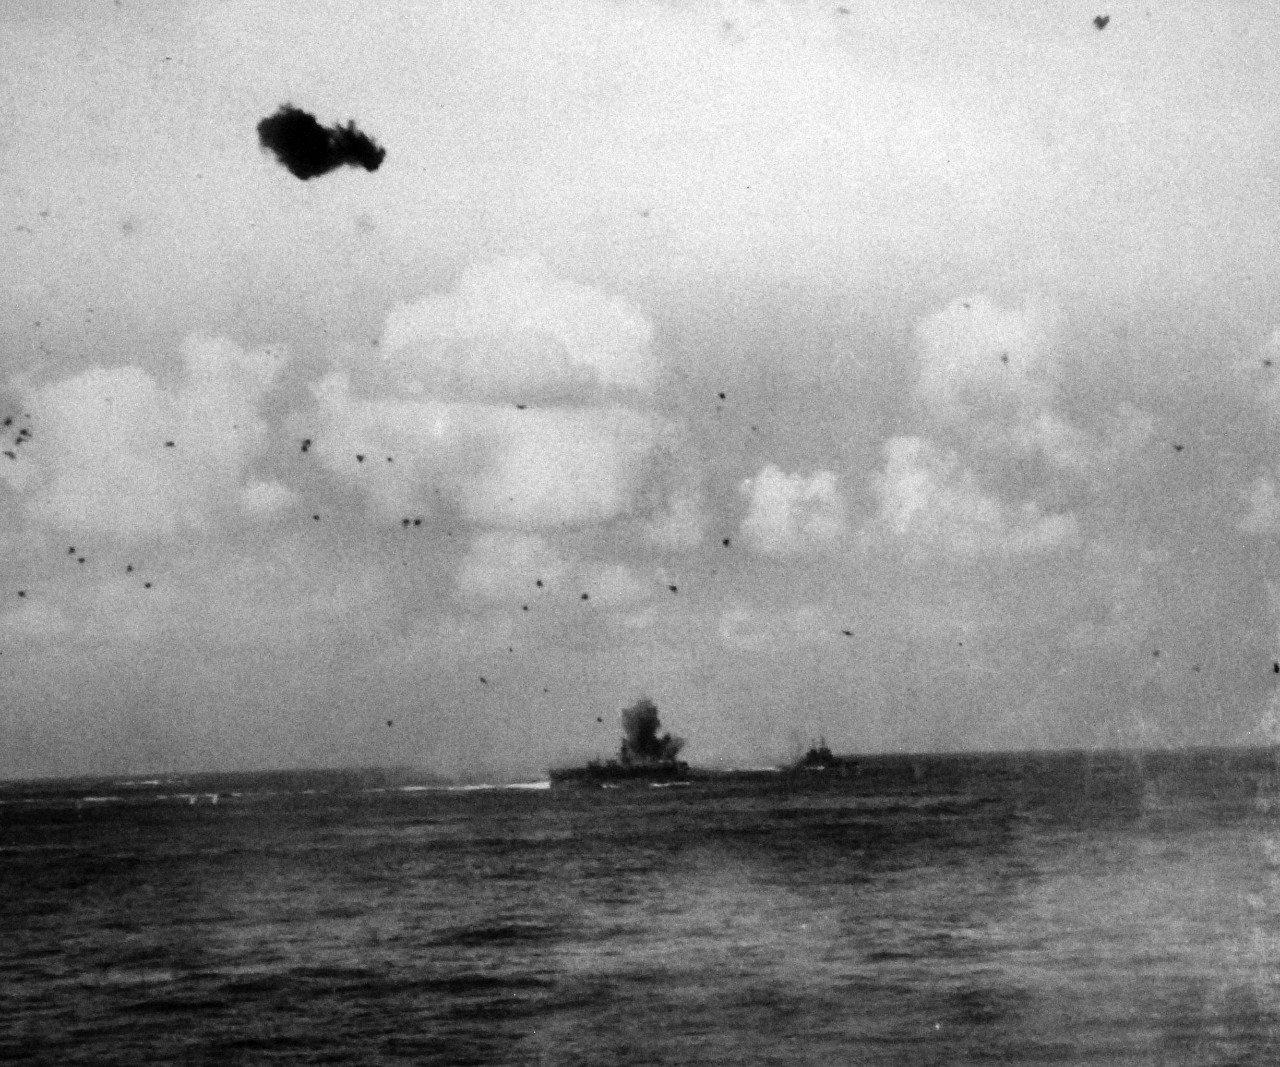 80-G-373774:   Okinawa Campaign, Pre-Landing Bombardment, Japanese Kamikaze, March 1945.     Near miss by Japanese plane on USS Bataan (CVL-29), unit of Task Force off Okinawa in the Ryukyu Islands.   As seen from USS Essex (CV-9), March 17, 1945.    Official U.S. Navy Photograph, now in the collection of the National Archives.   (2014/5/8).   